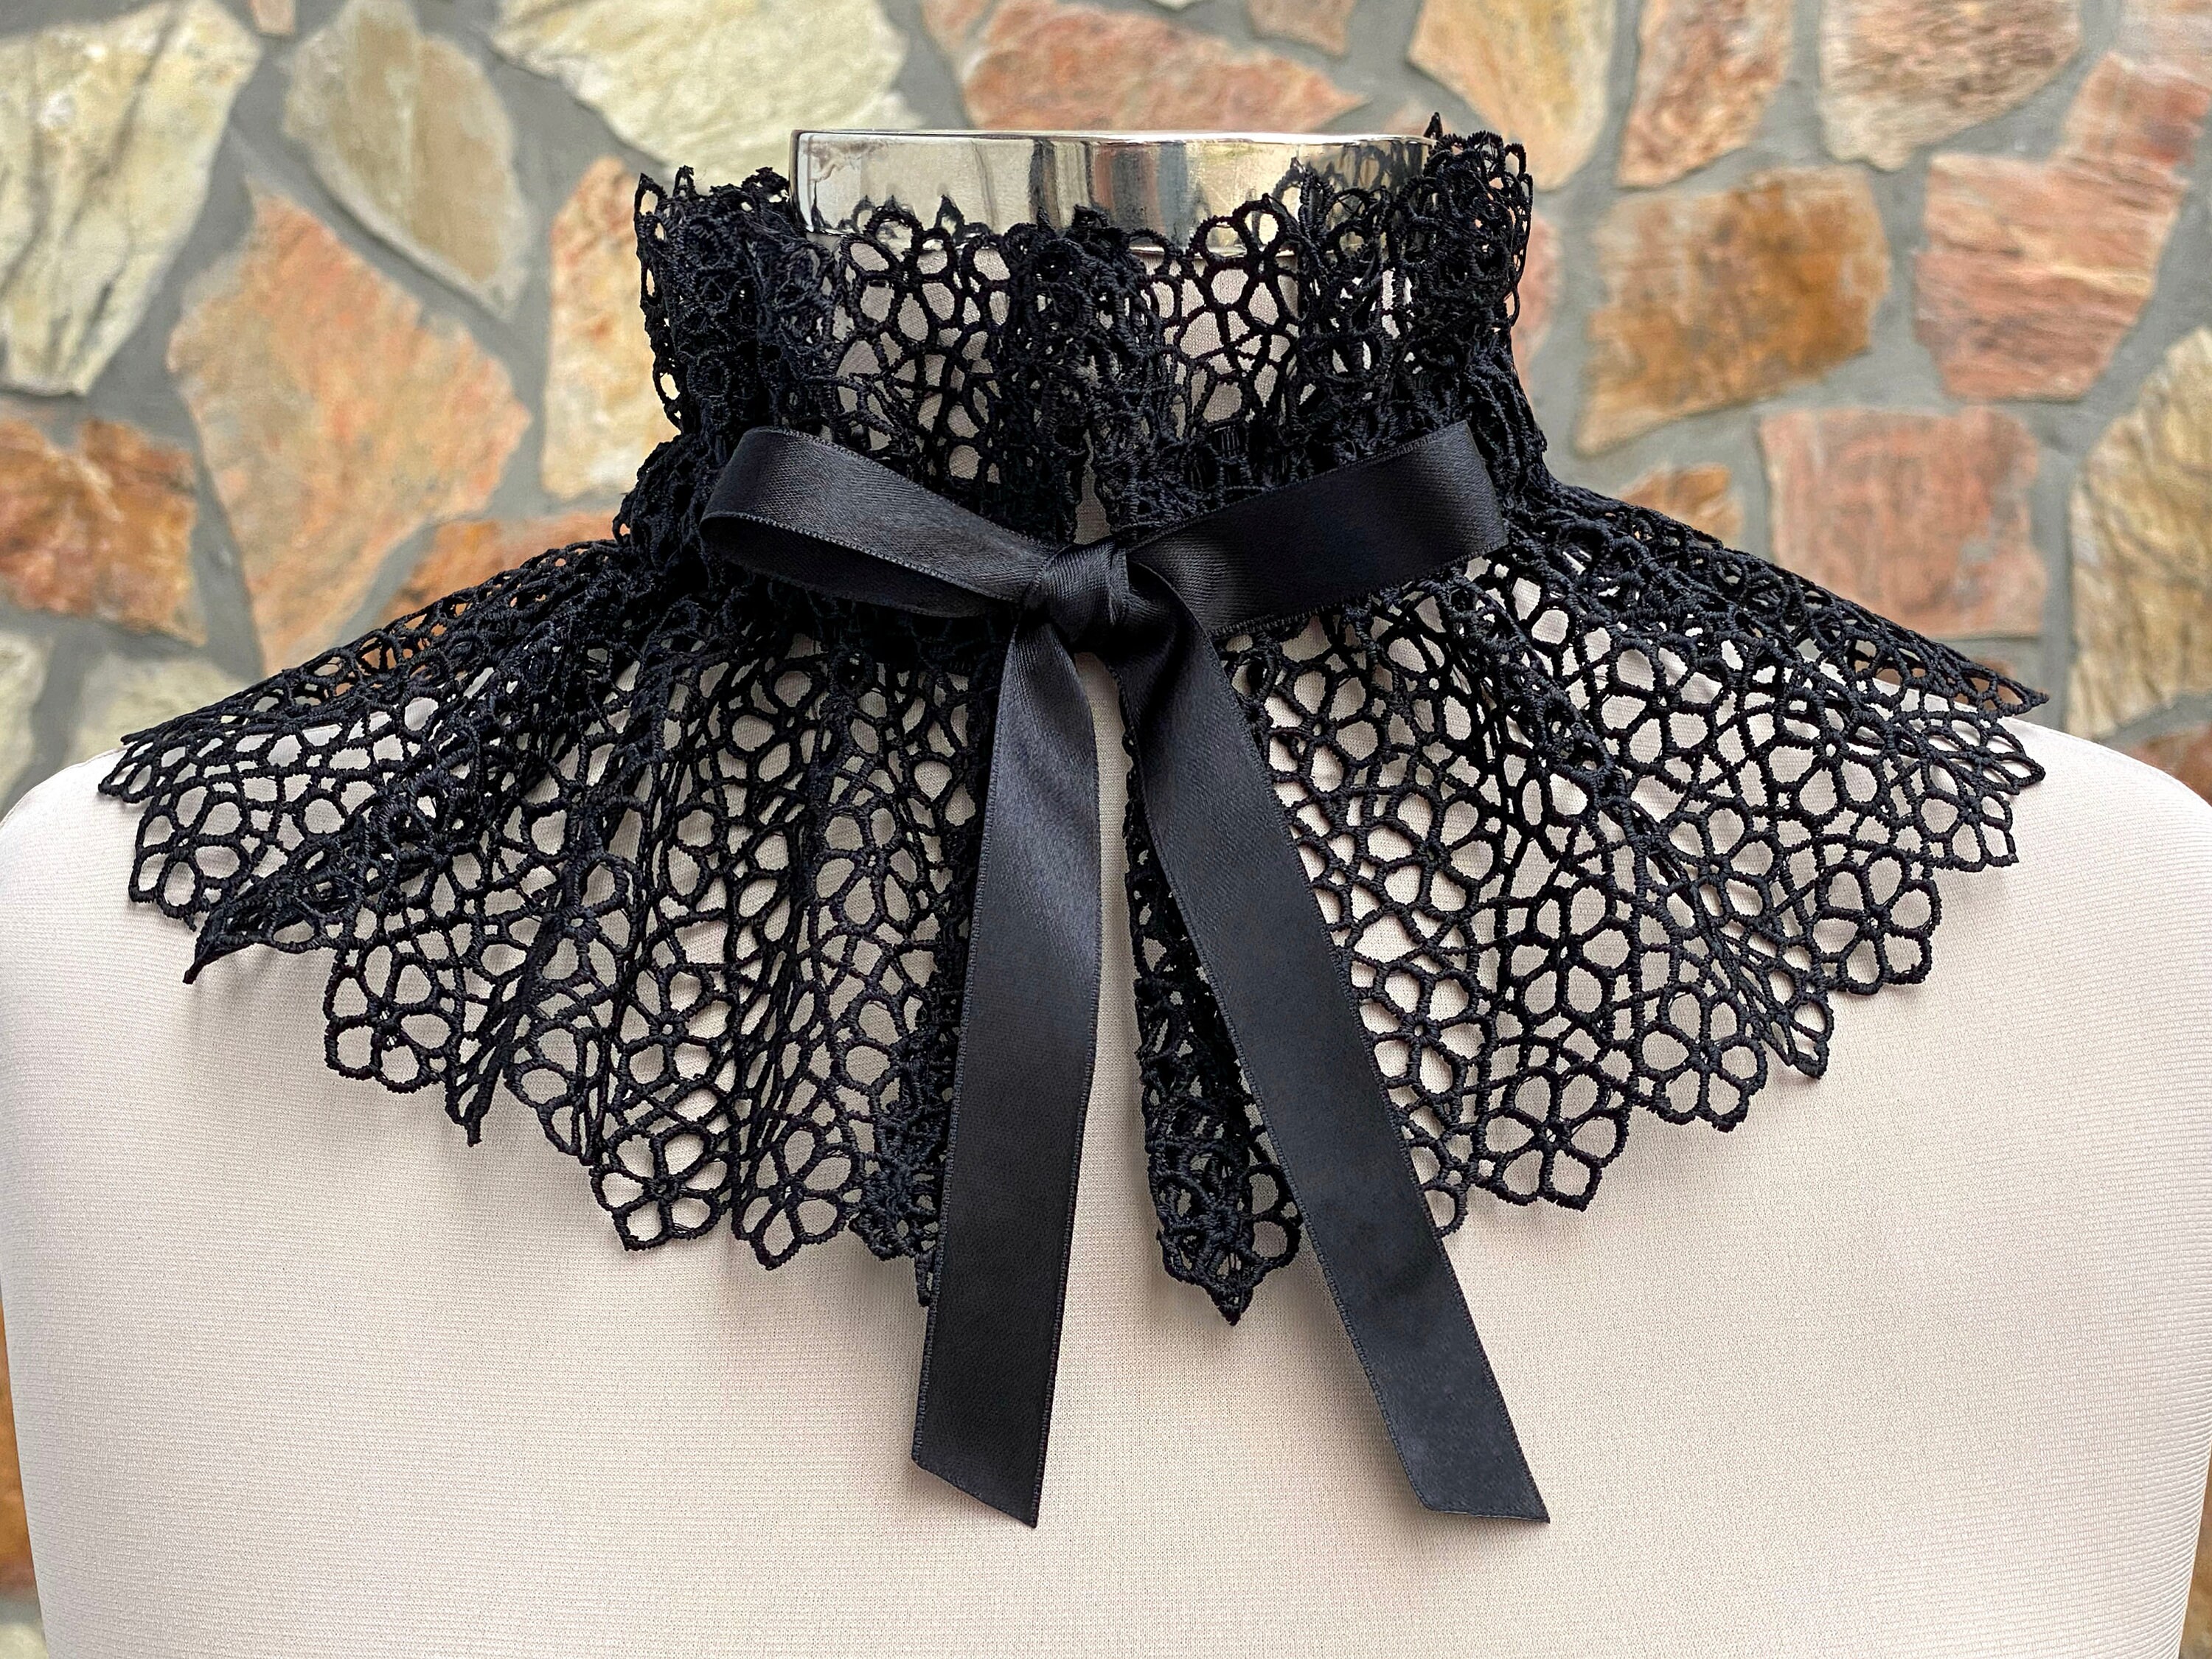 Black Double Ruffled Lace Trim, Candlewick 2 Tier Lace, Apparel